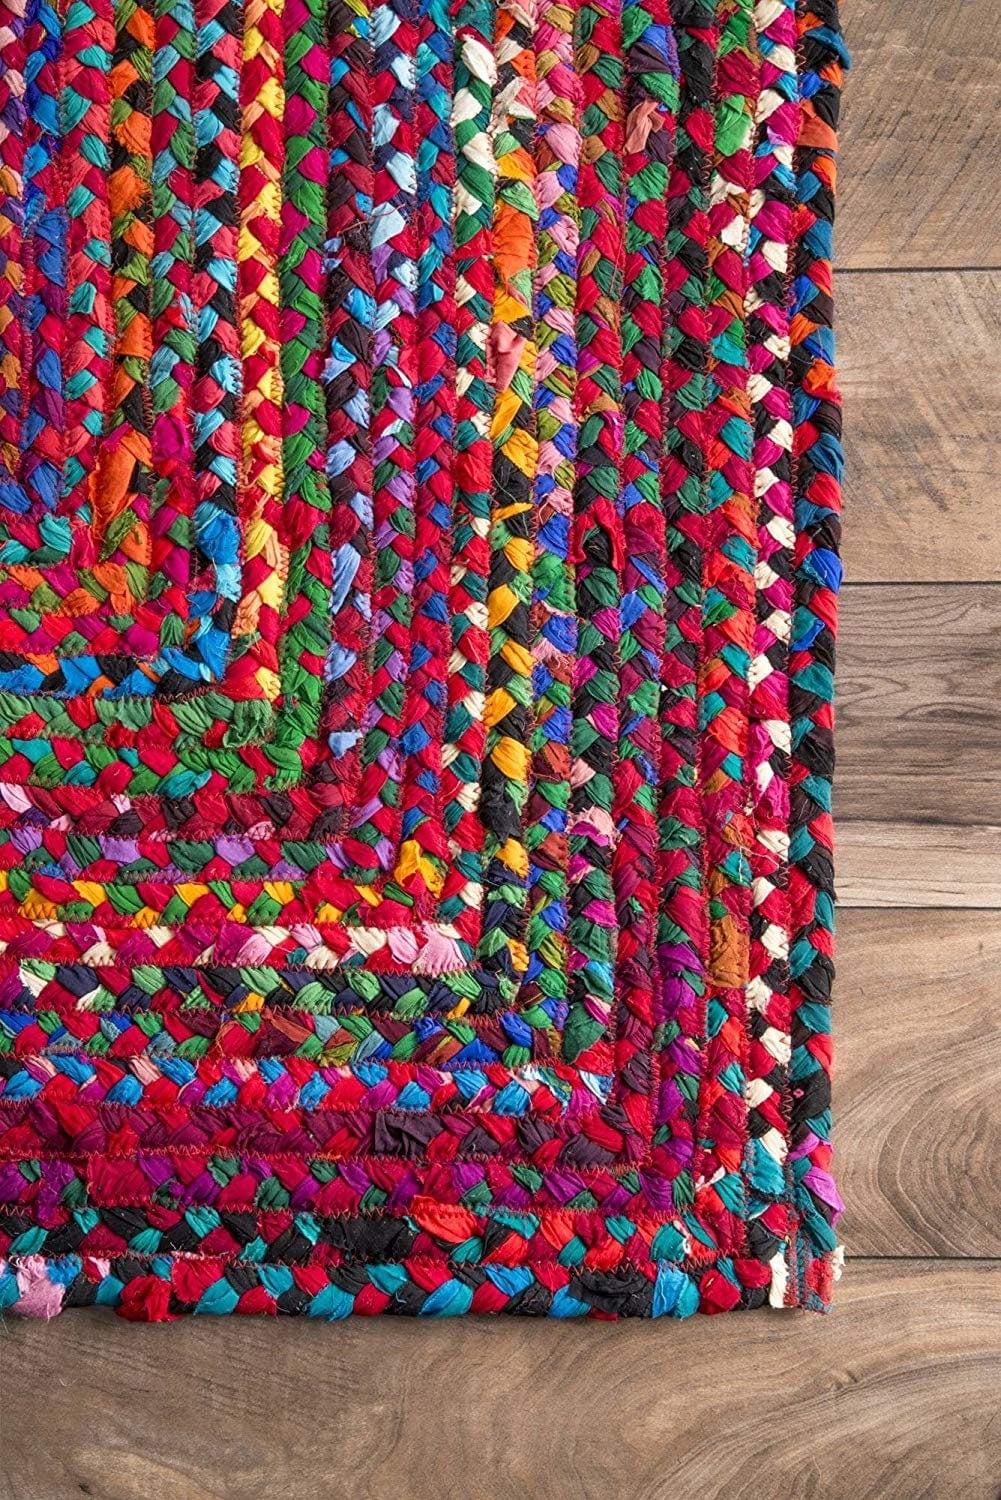 A Braided Rag Rug with Colorful Fabrics Stock Photo - Image of